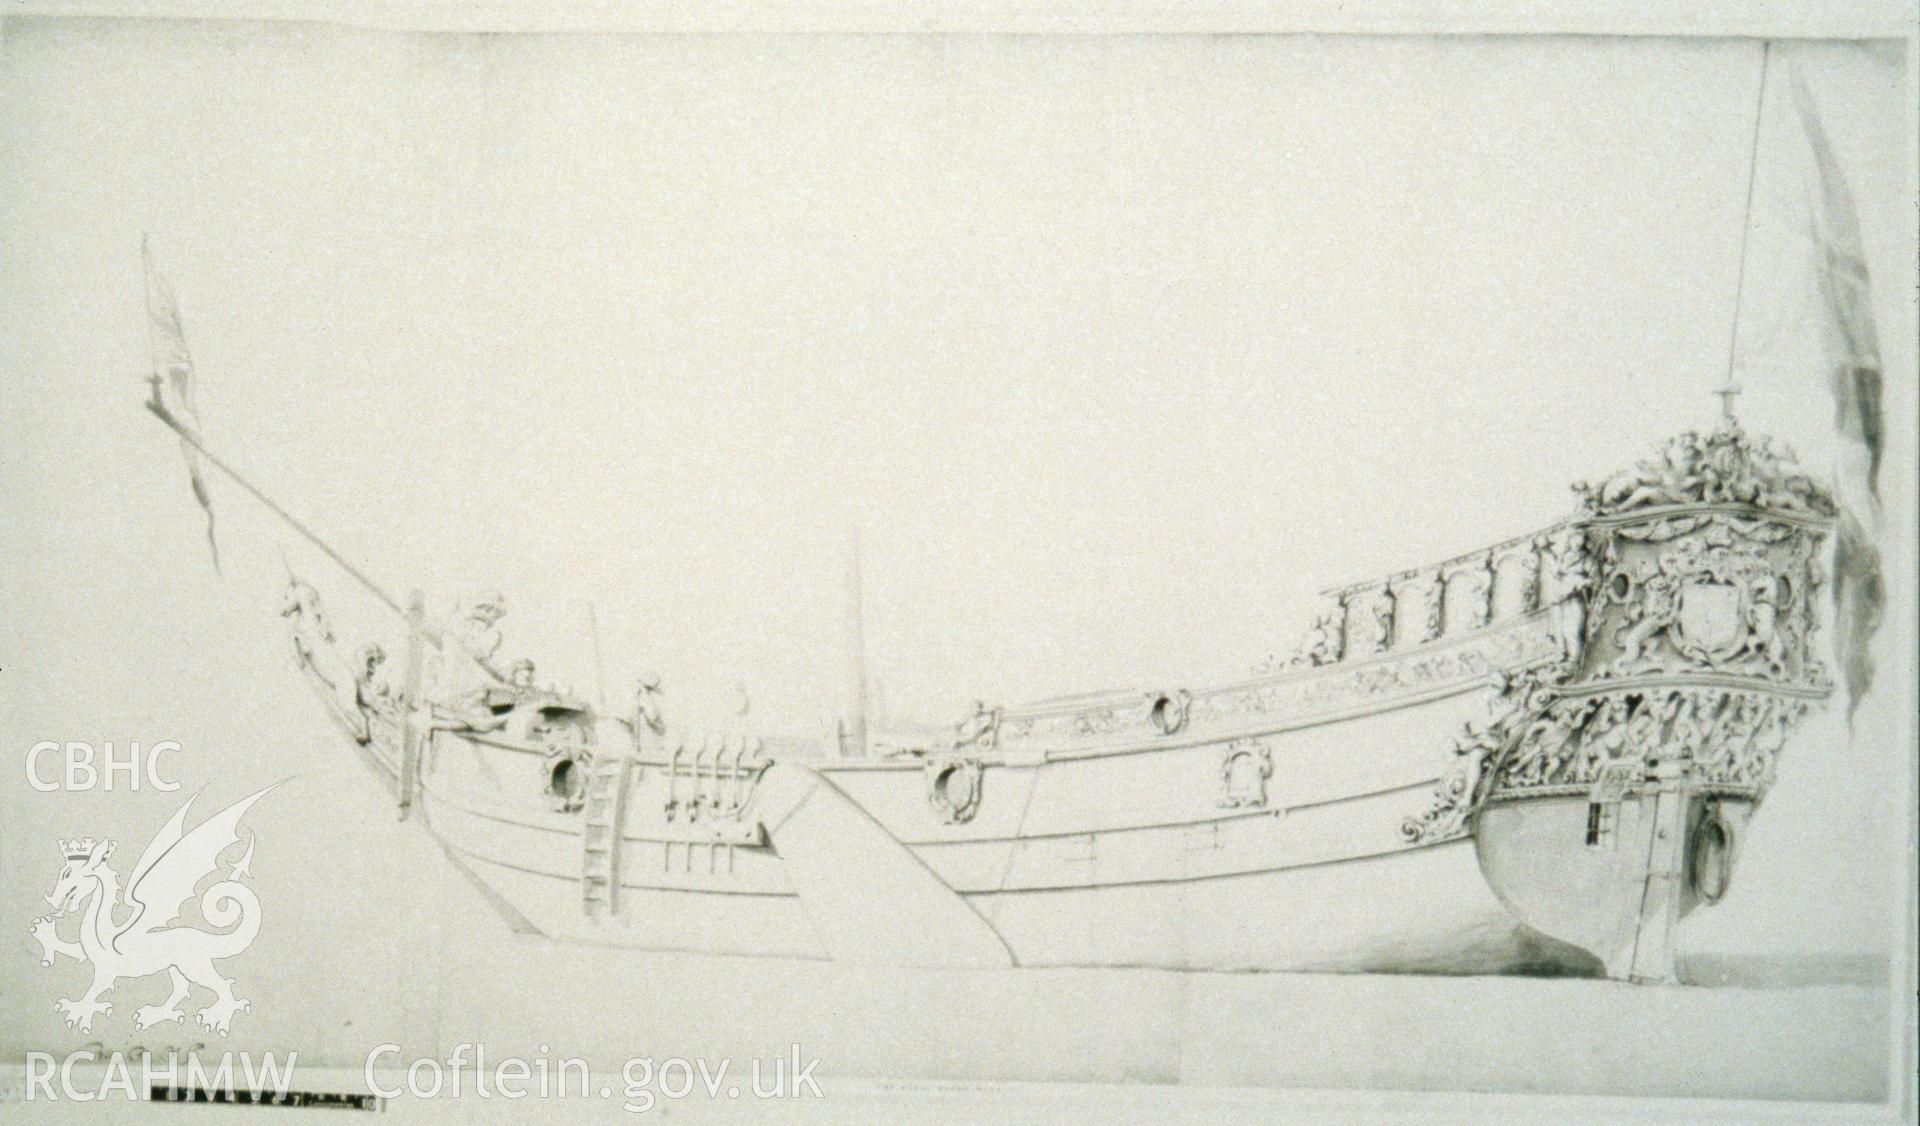 Colour slide of an historic illustration of the Royal Yacht Mary, from a survey of the Mary designated shipwreck, courtesy of National Museums, Liverpool (Merseyside Maritime Museum)